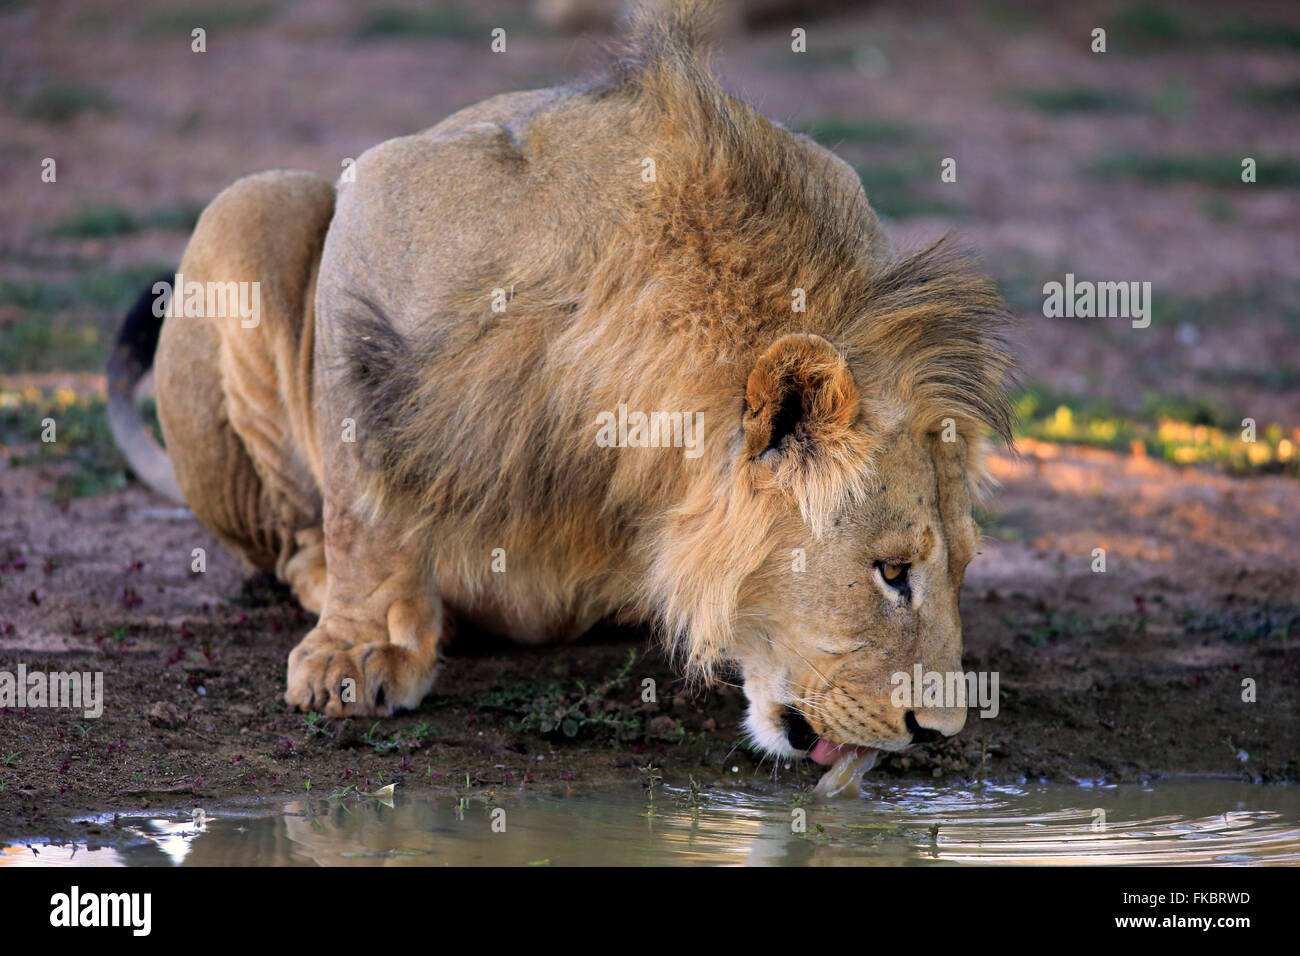 Lion, male five years old drinking at water, Tswalu Game Reserve, Kalahari, Northern Cape, South Africa, Africa / (Panthera leo) Stock Photo